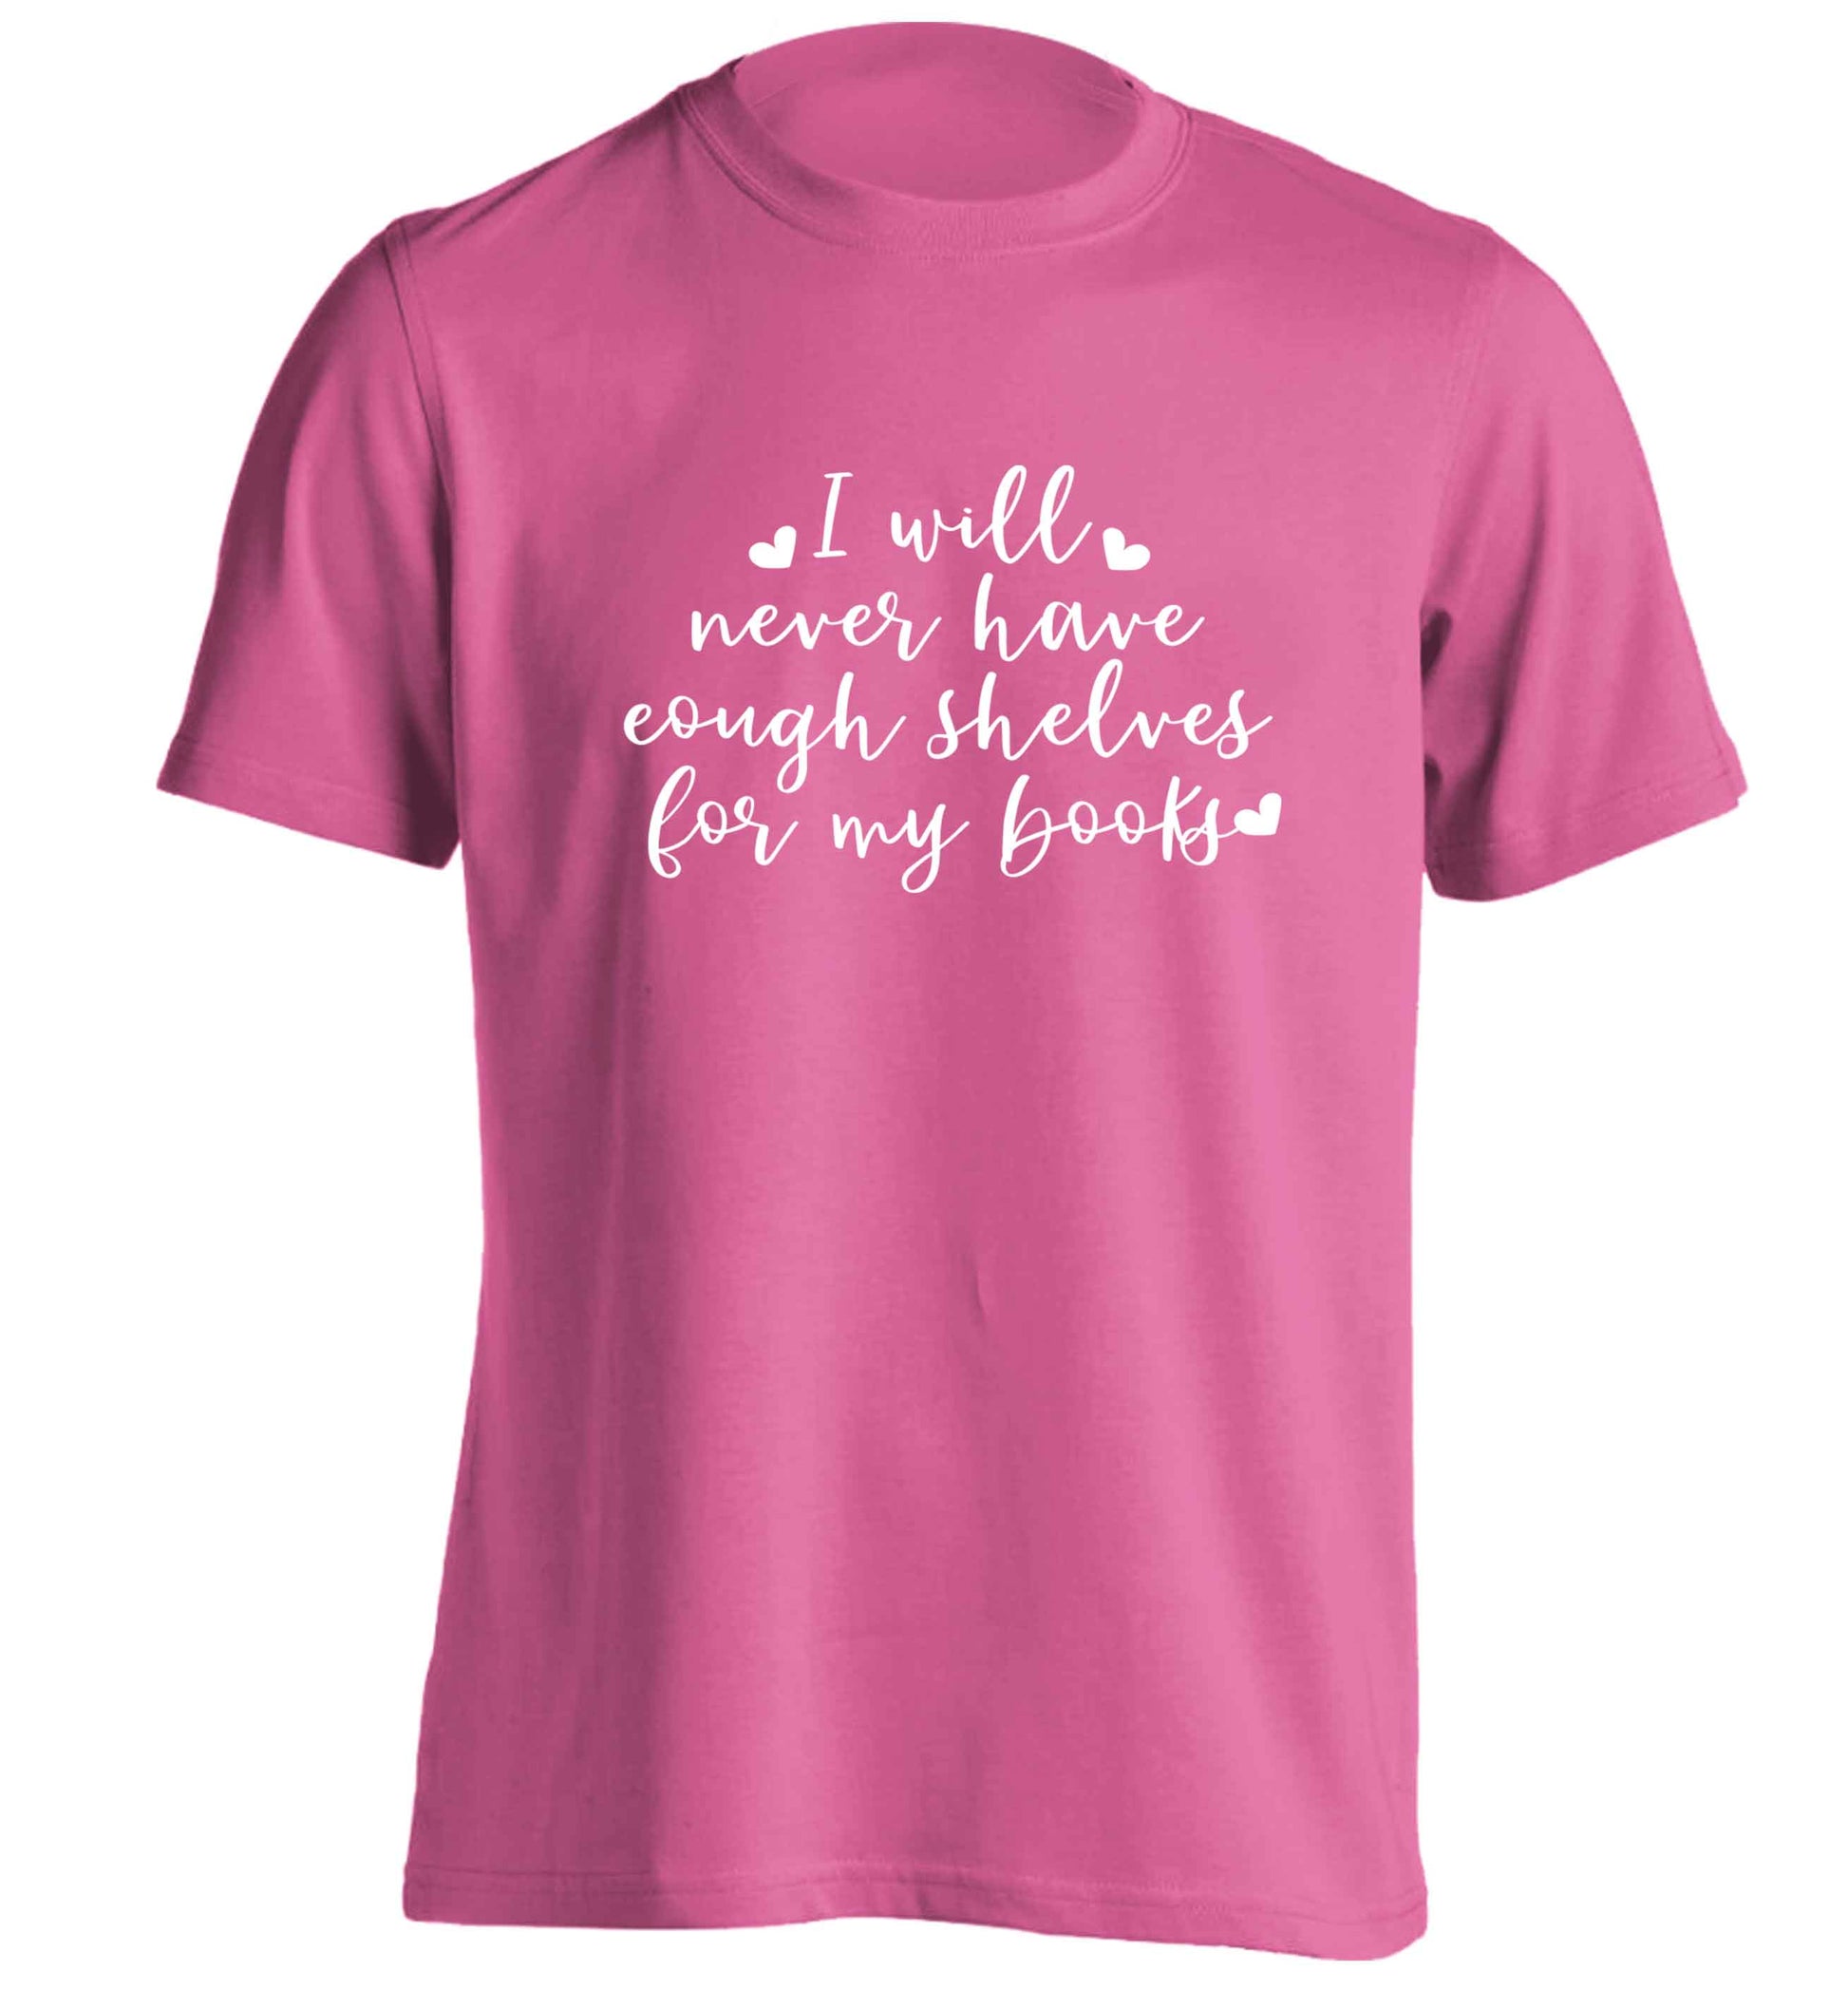 I will never have enough shelves for my books adults unisex pink Tshirt 2XL